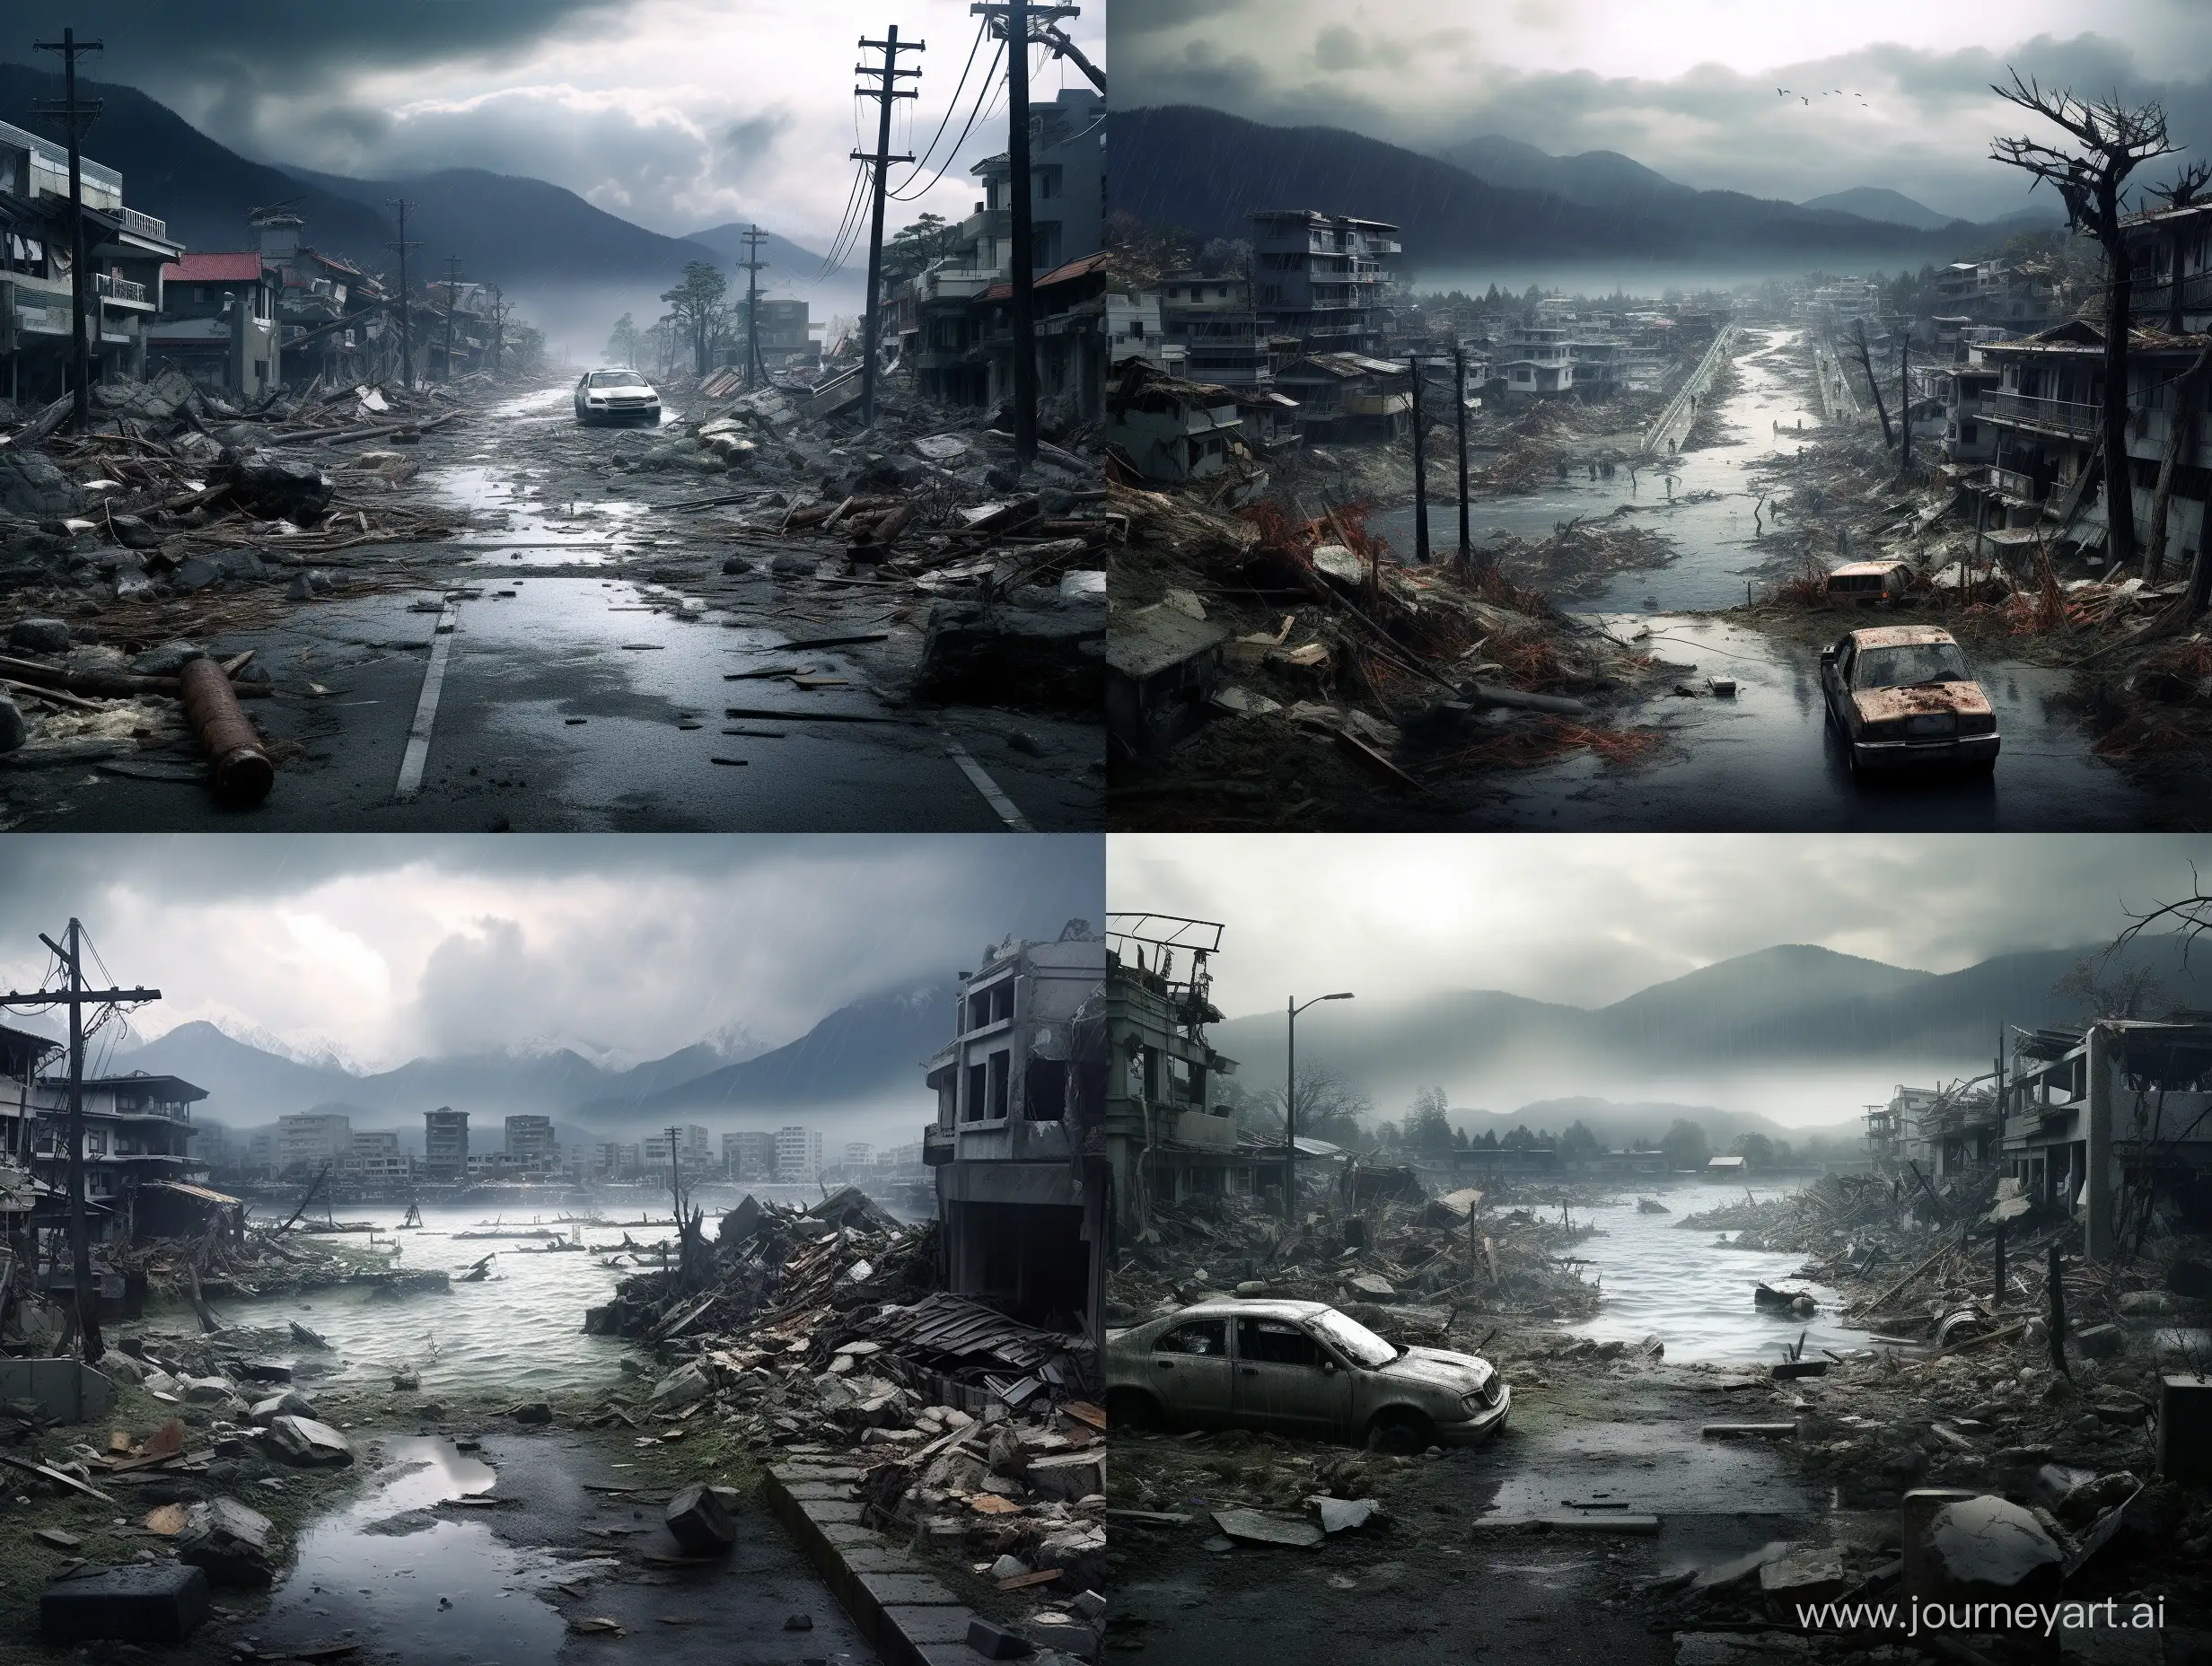 Dramatic-Photorealistic-Depiction-of-a-Japanese-City-Devastated-by-Tsunami-on-a-Cloudy-Day